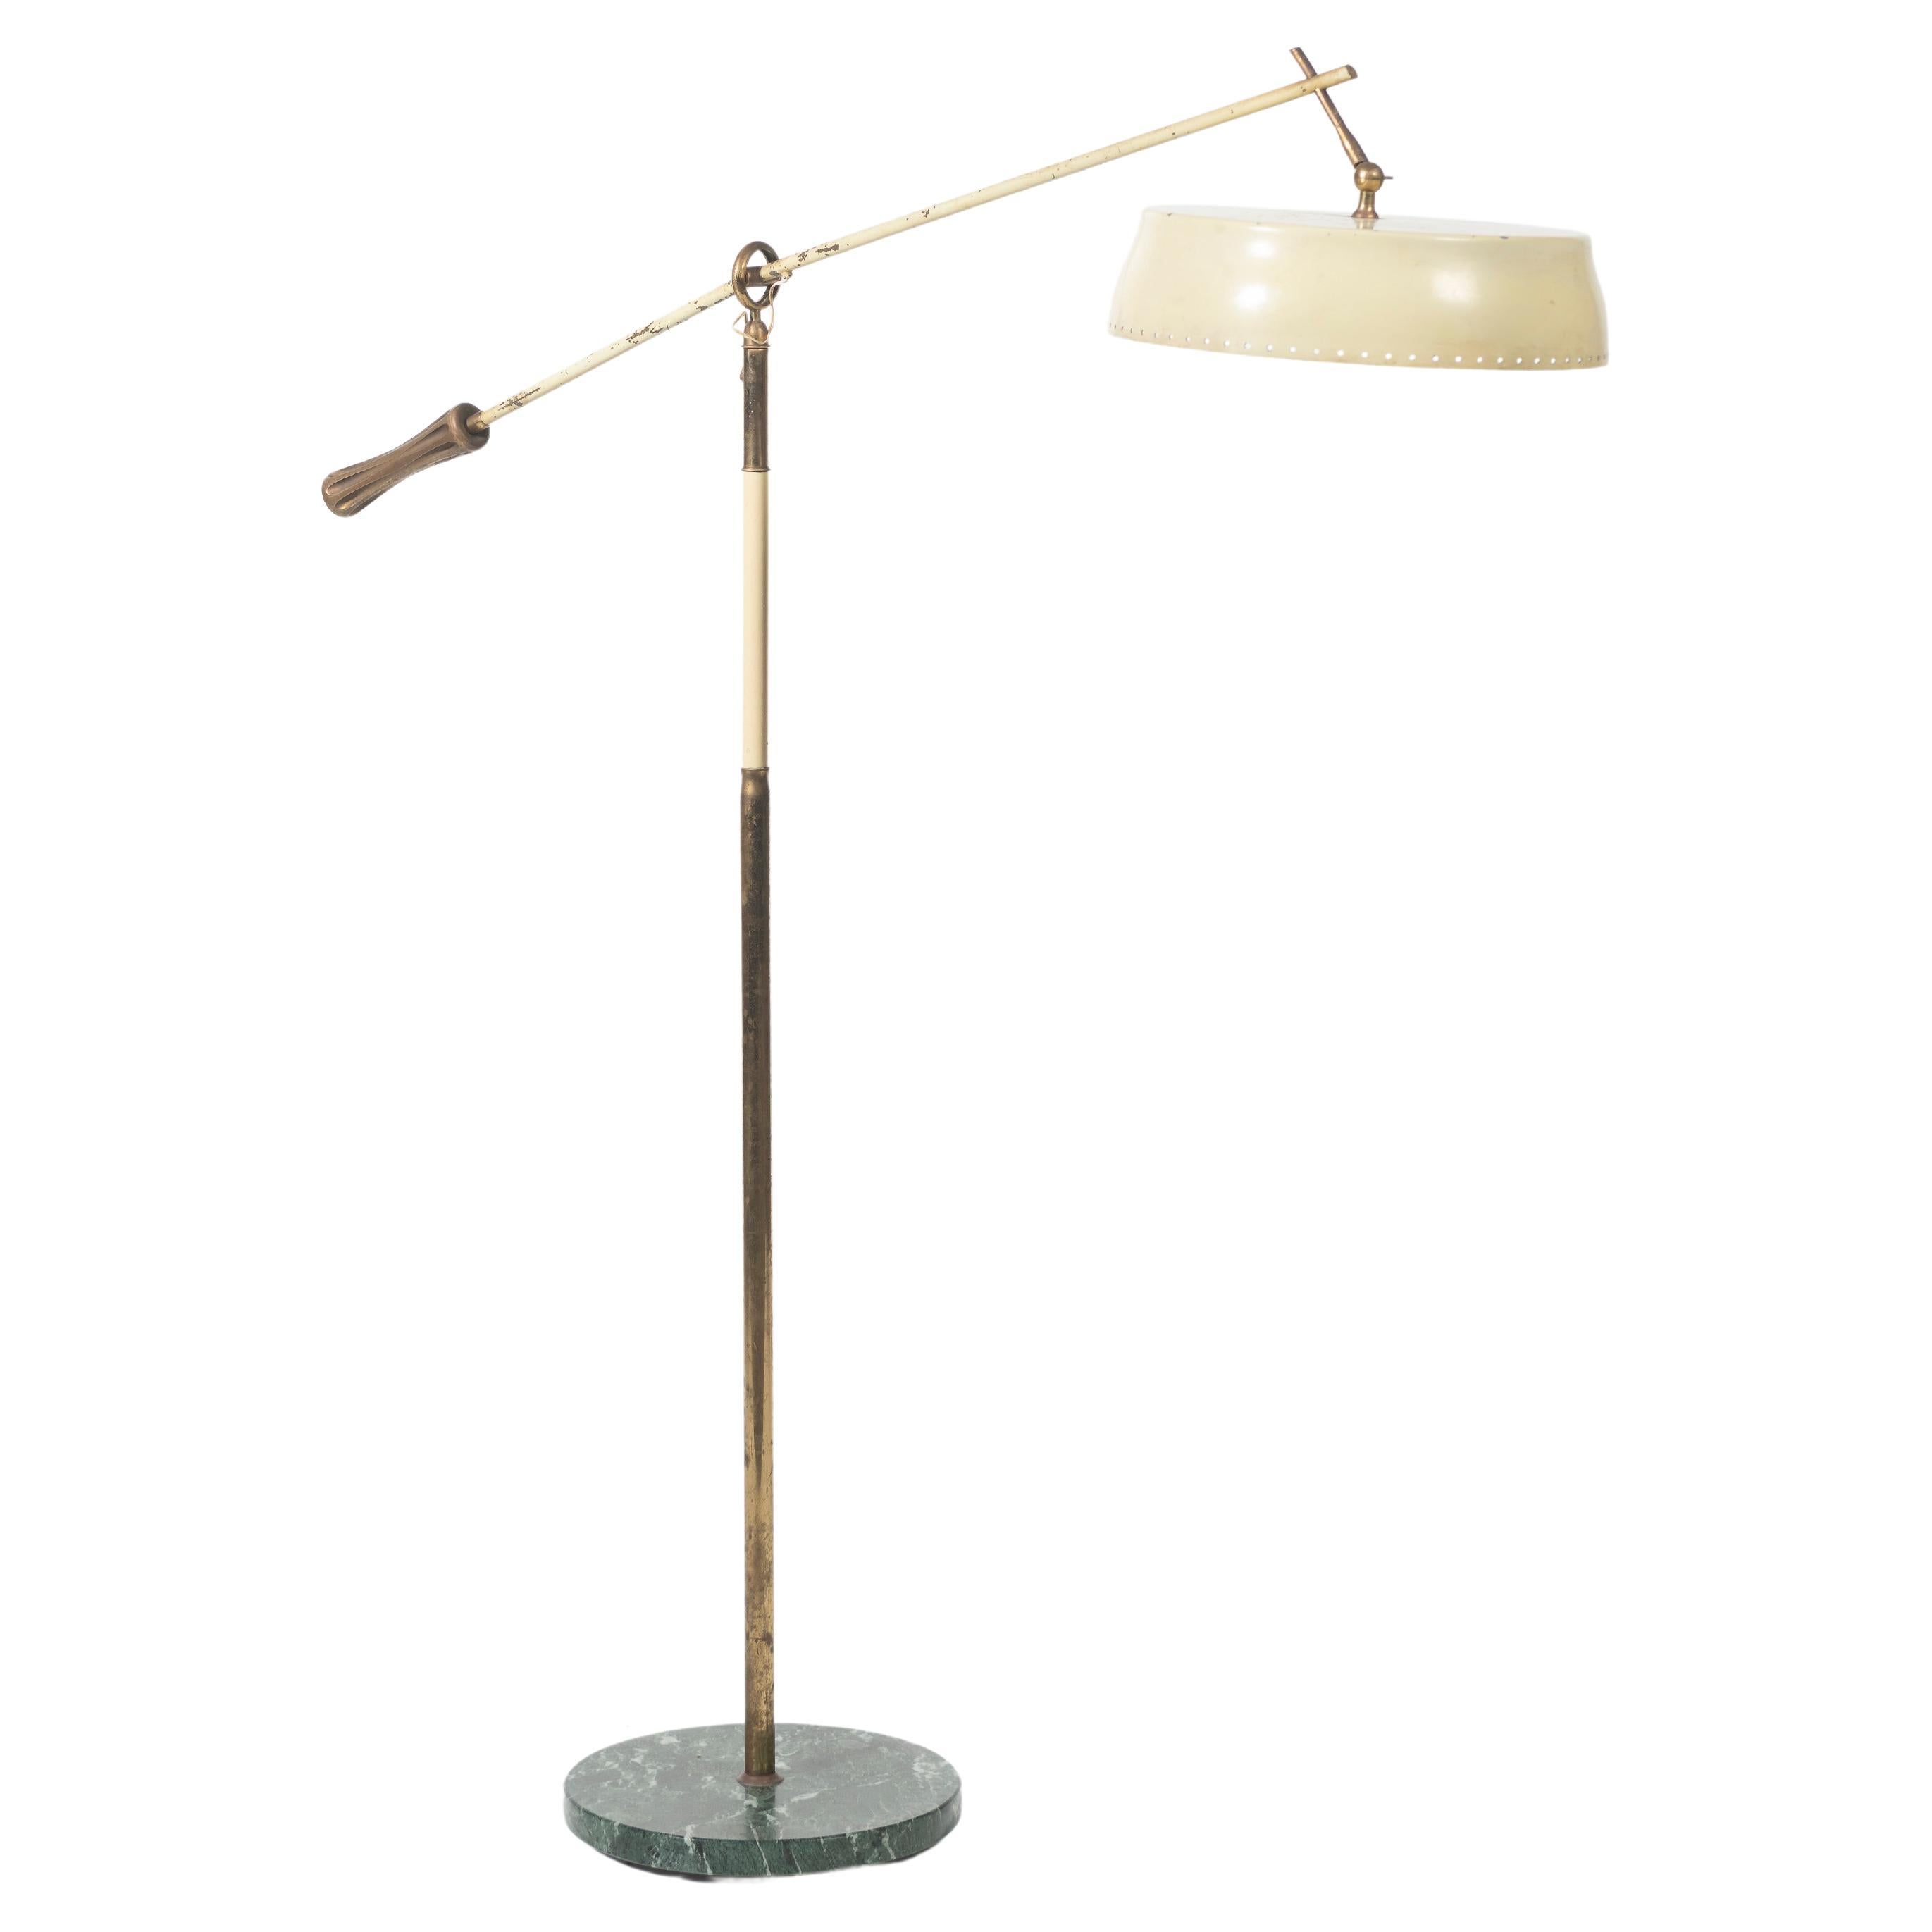 Italian Mid Century Floor Lamp in Brass with Swing Arm and Green Marble Base For Sale